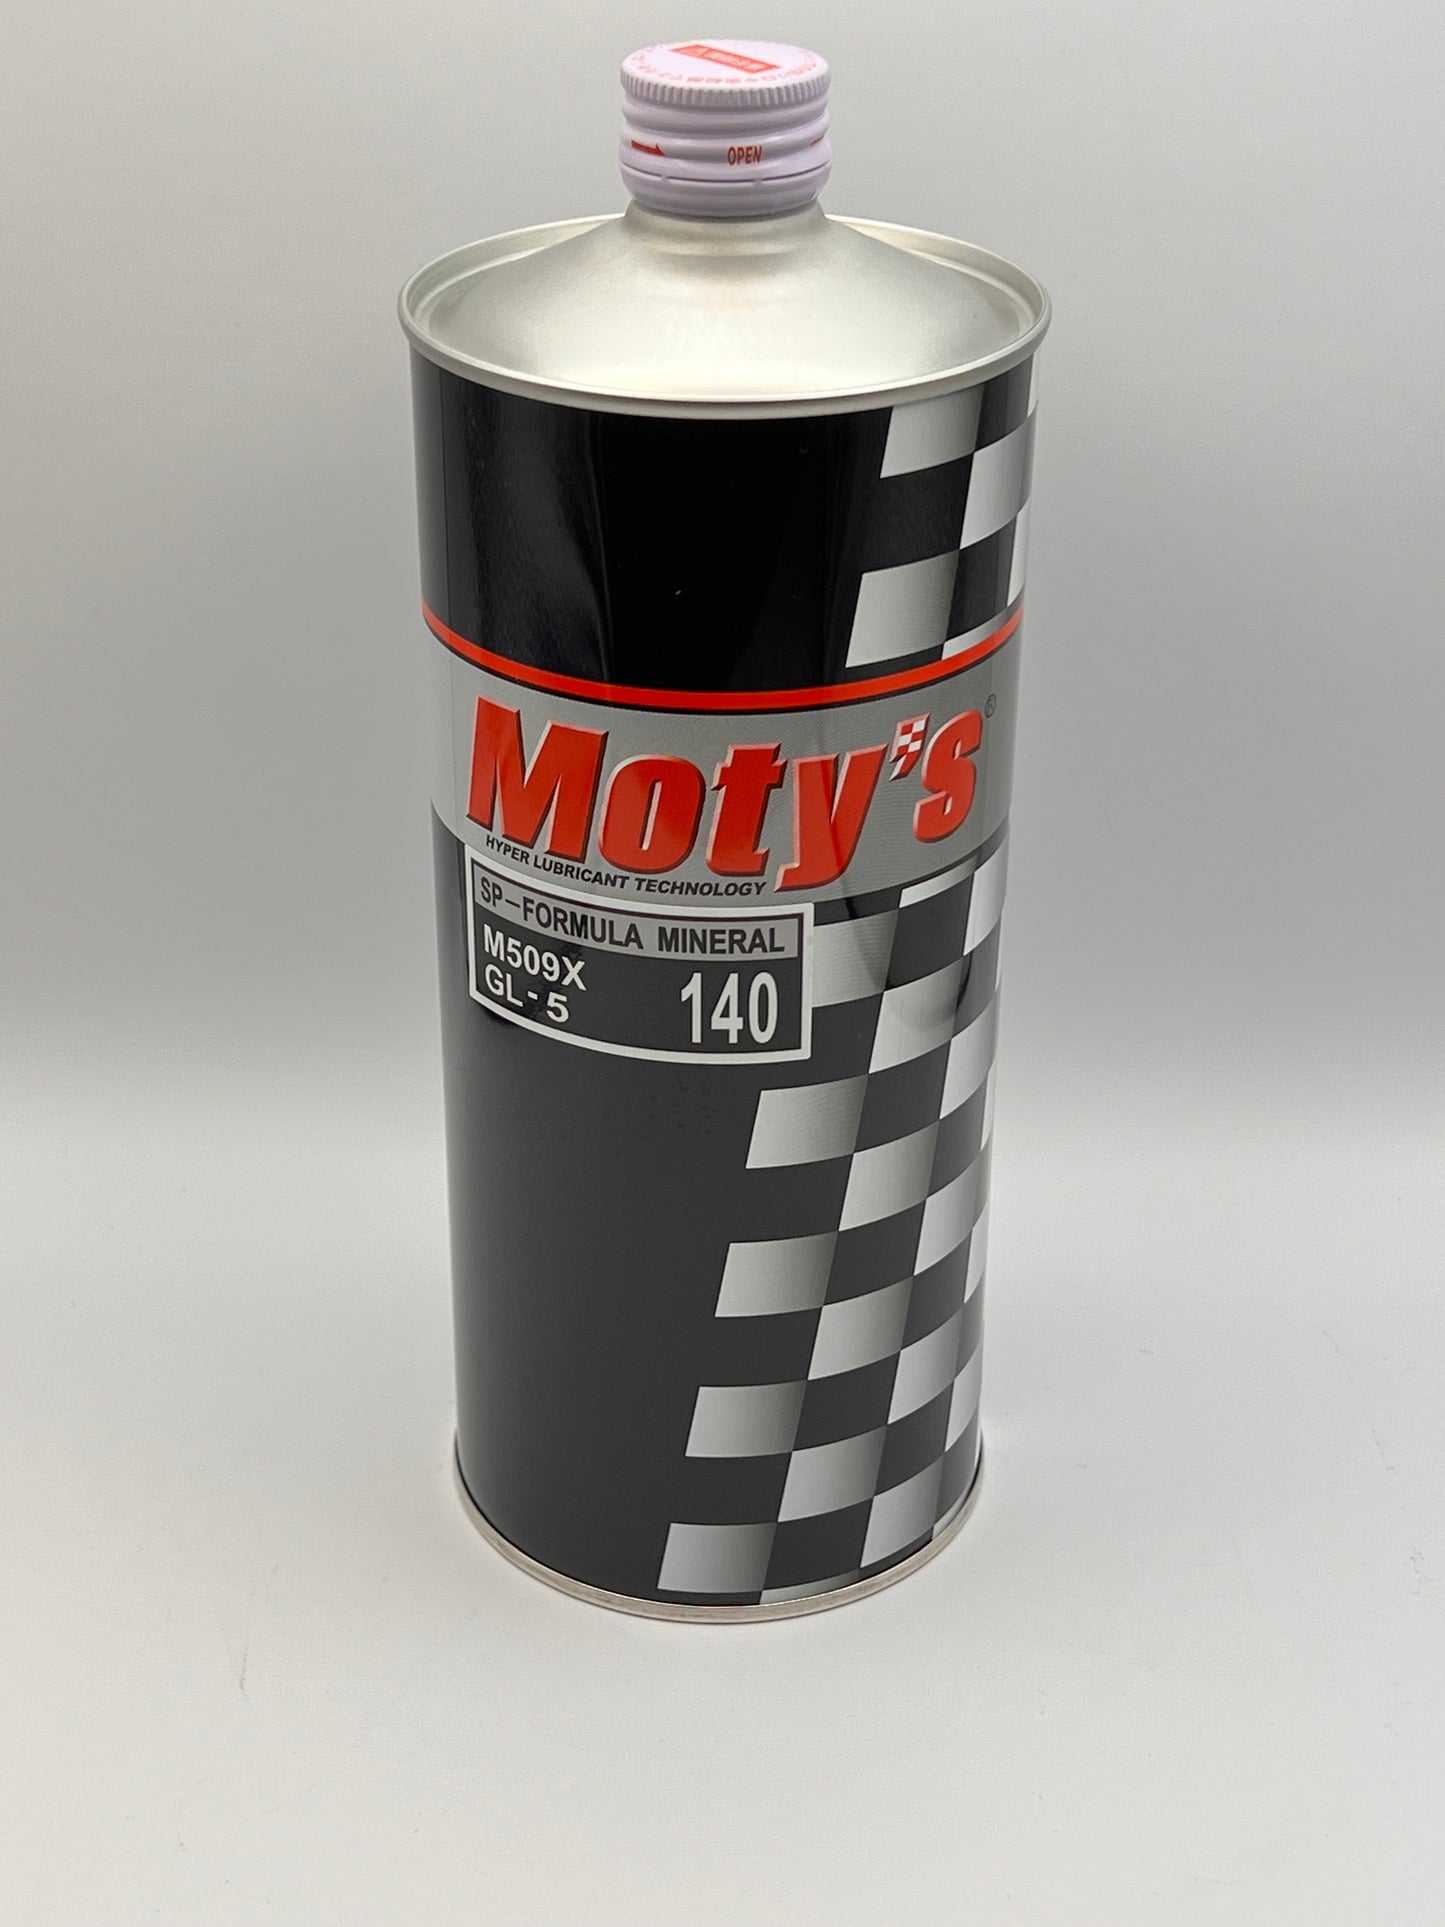 Moty's Gear Oil Specialized Mineral Oil M509X140 1 Litres